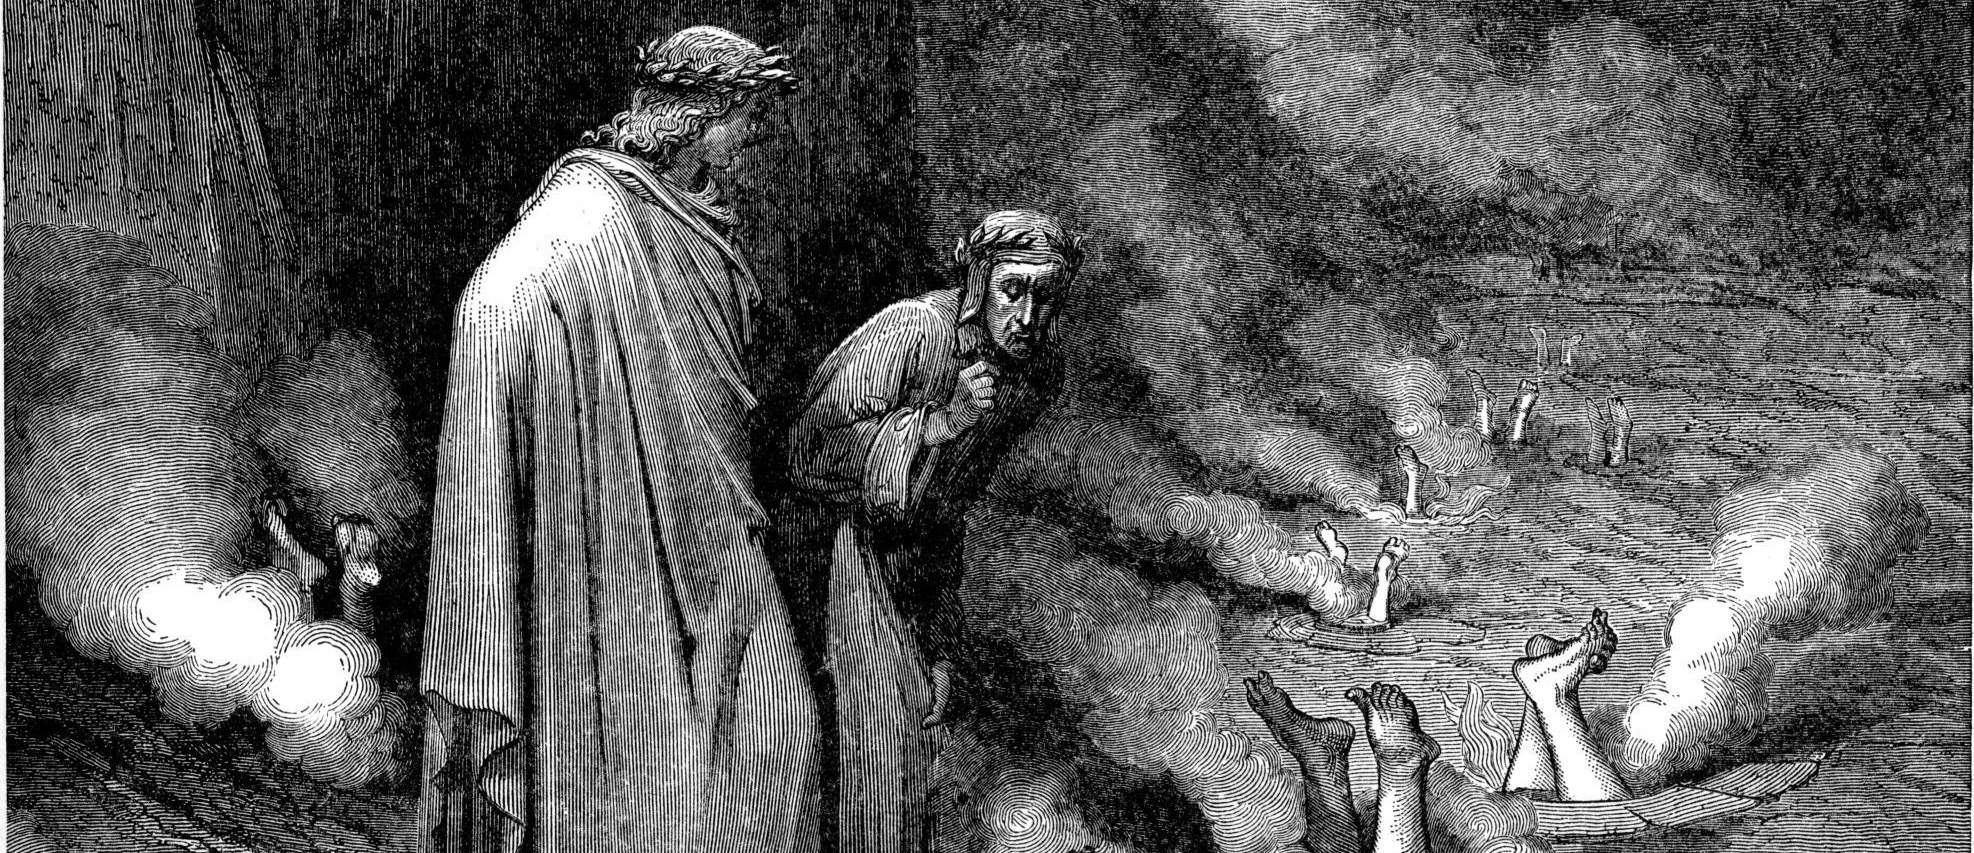 The Road to Hell: Dantes Inferno and the Undermining of Trust